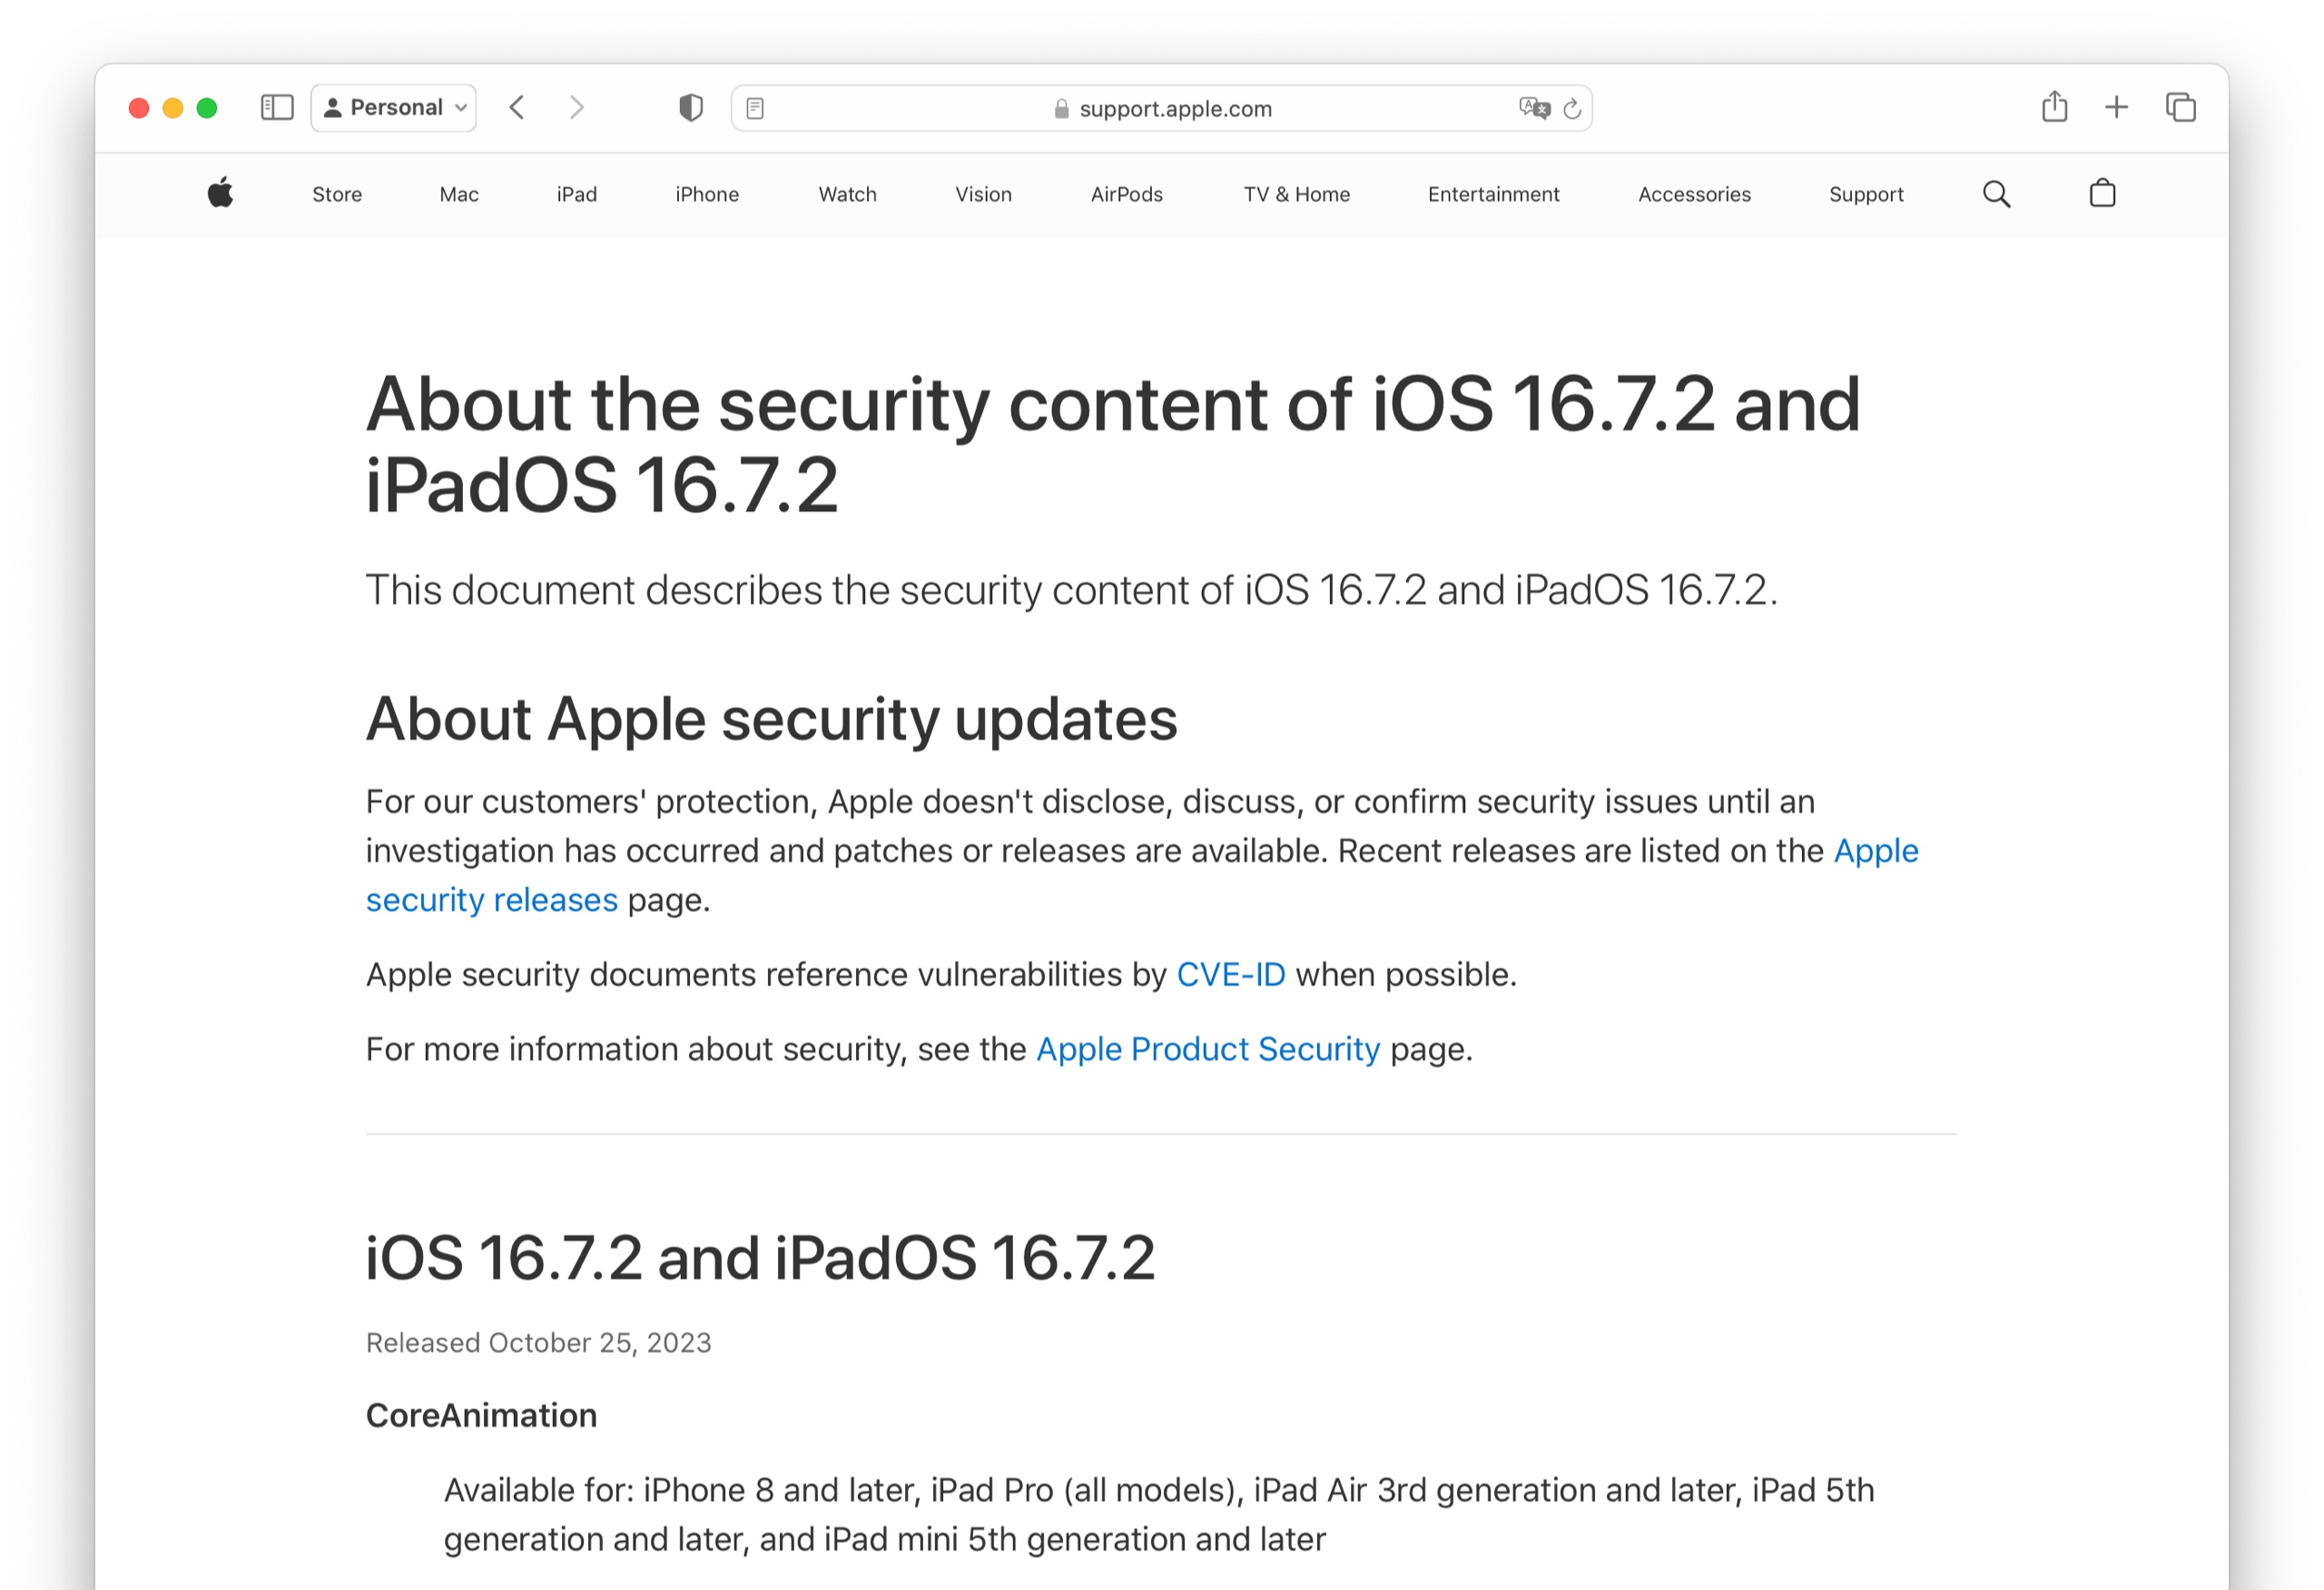 About the security content of iOS 16.7.2 and iPadOS 16.7.2